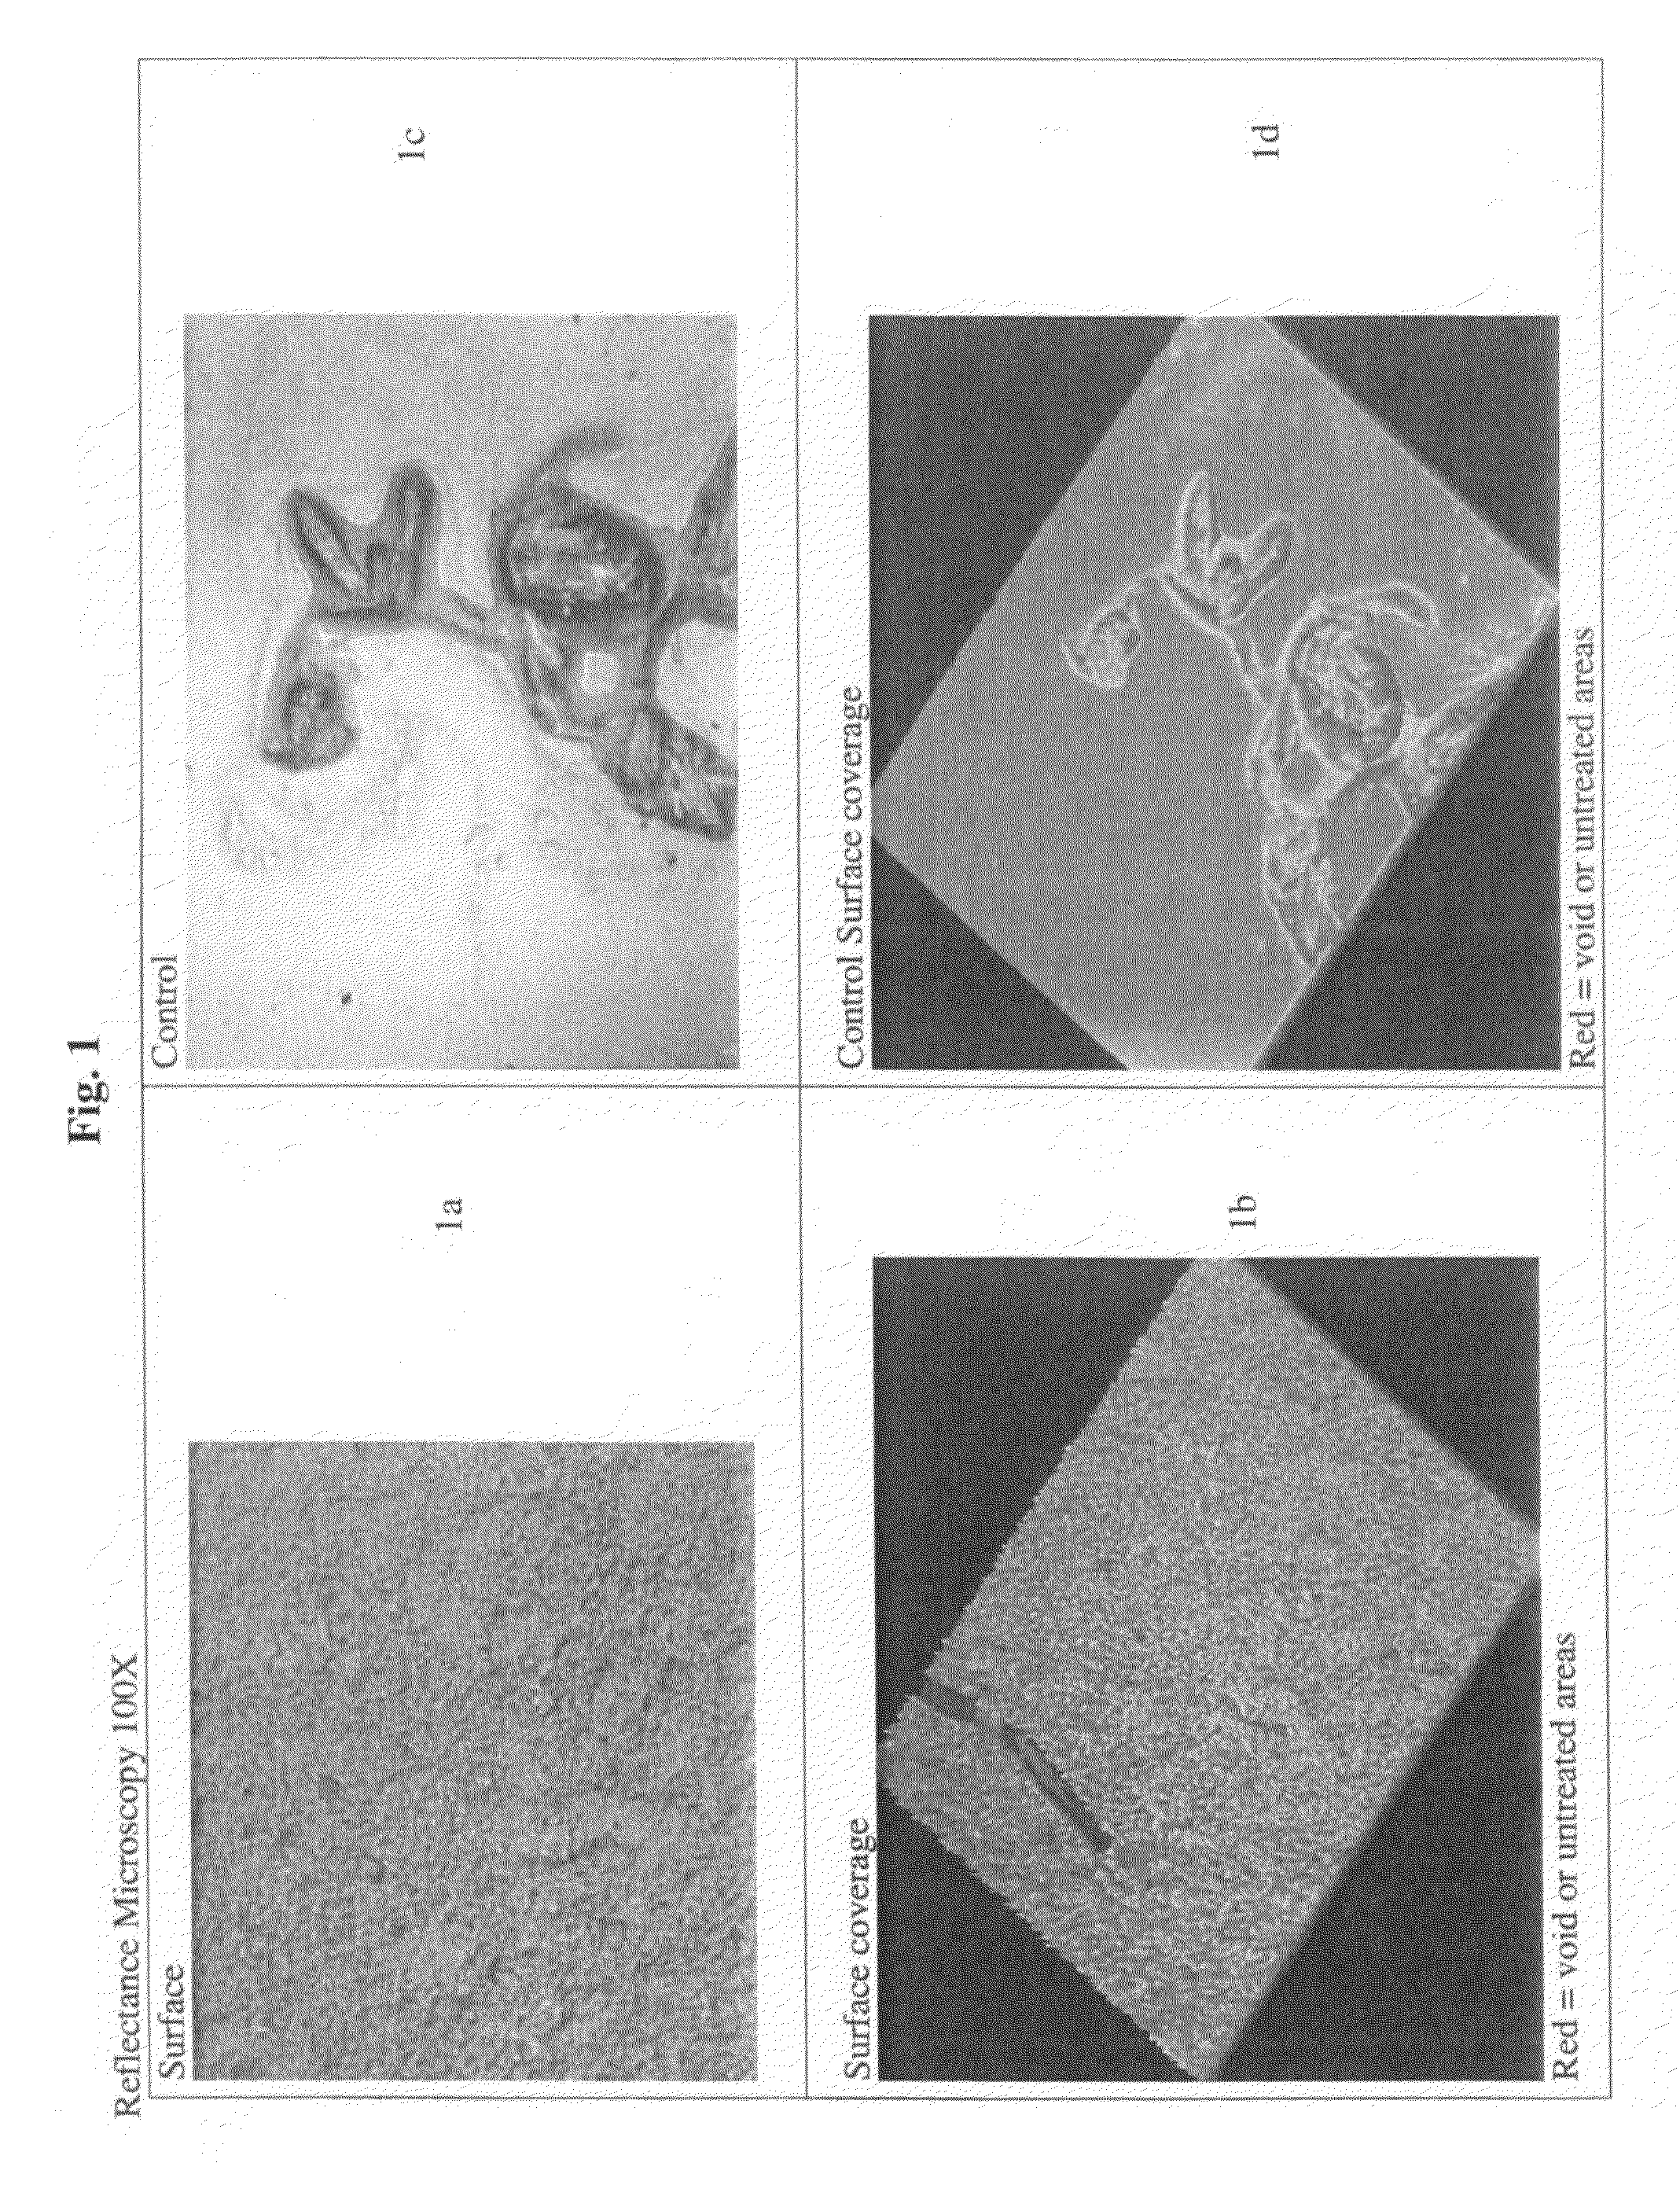 Methods and articles having a high antiviral and antibacterial efficacy